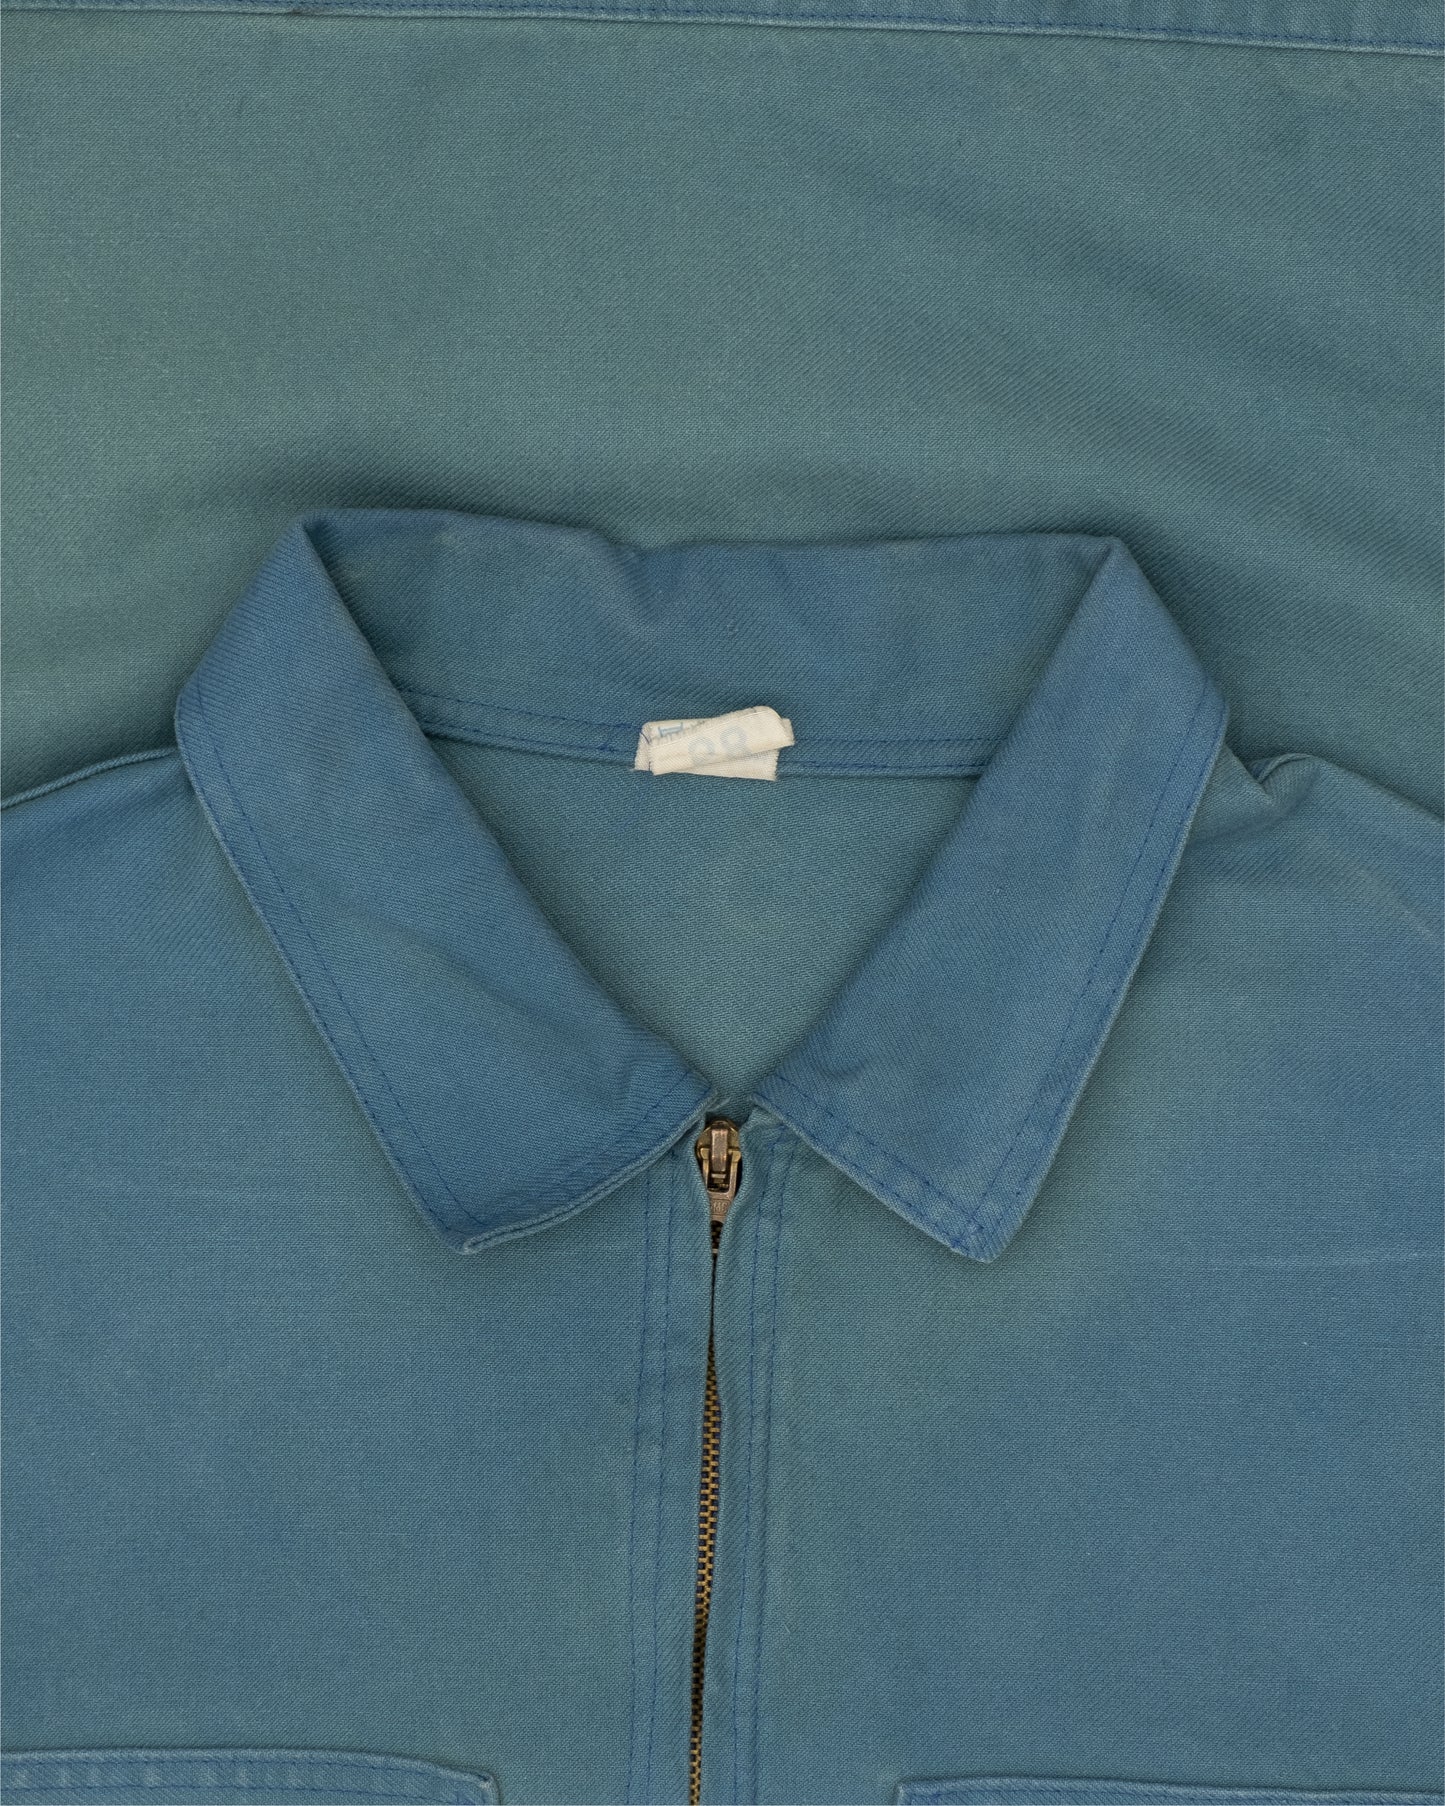 1960s French Cycling Jacket